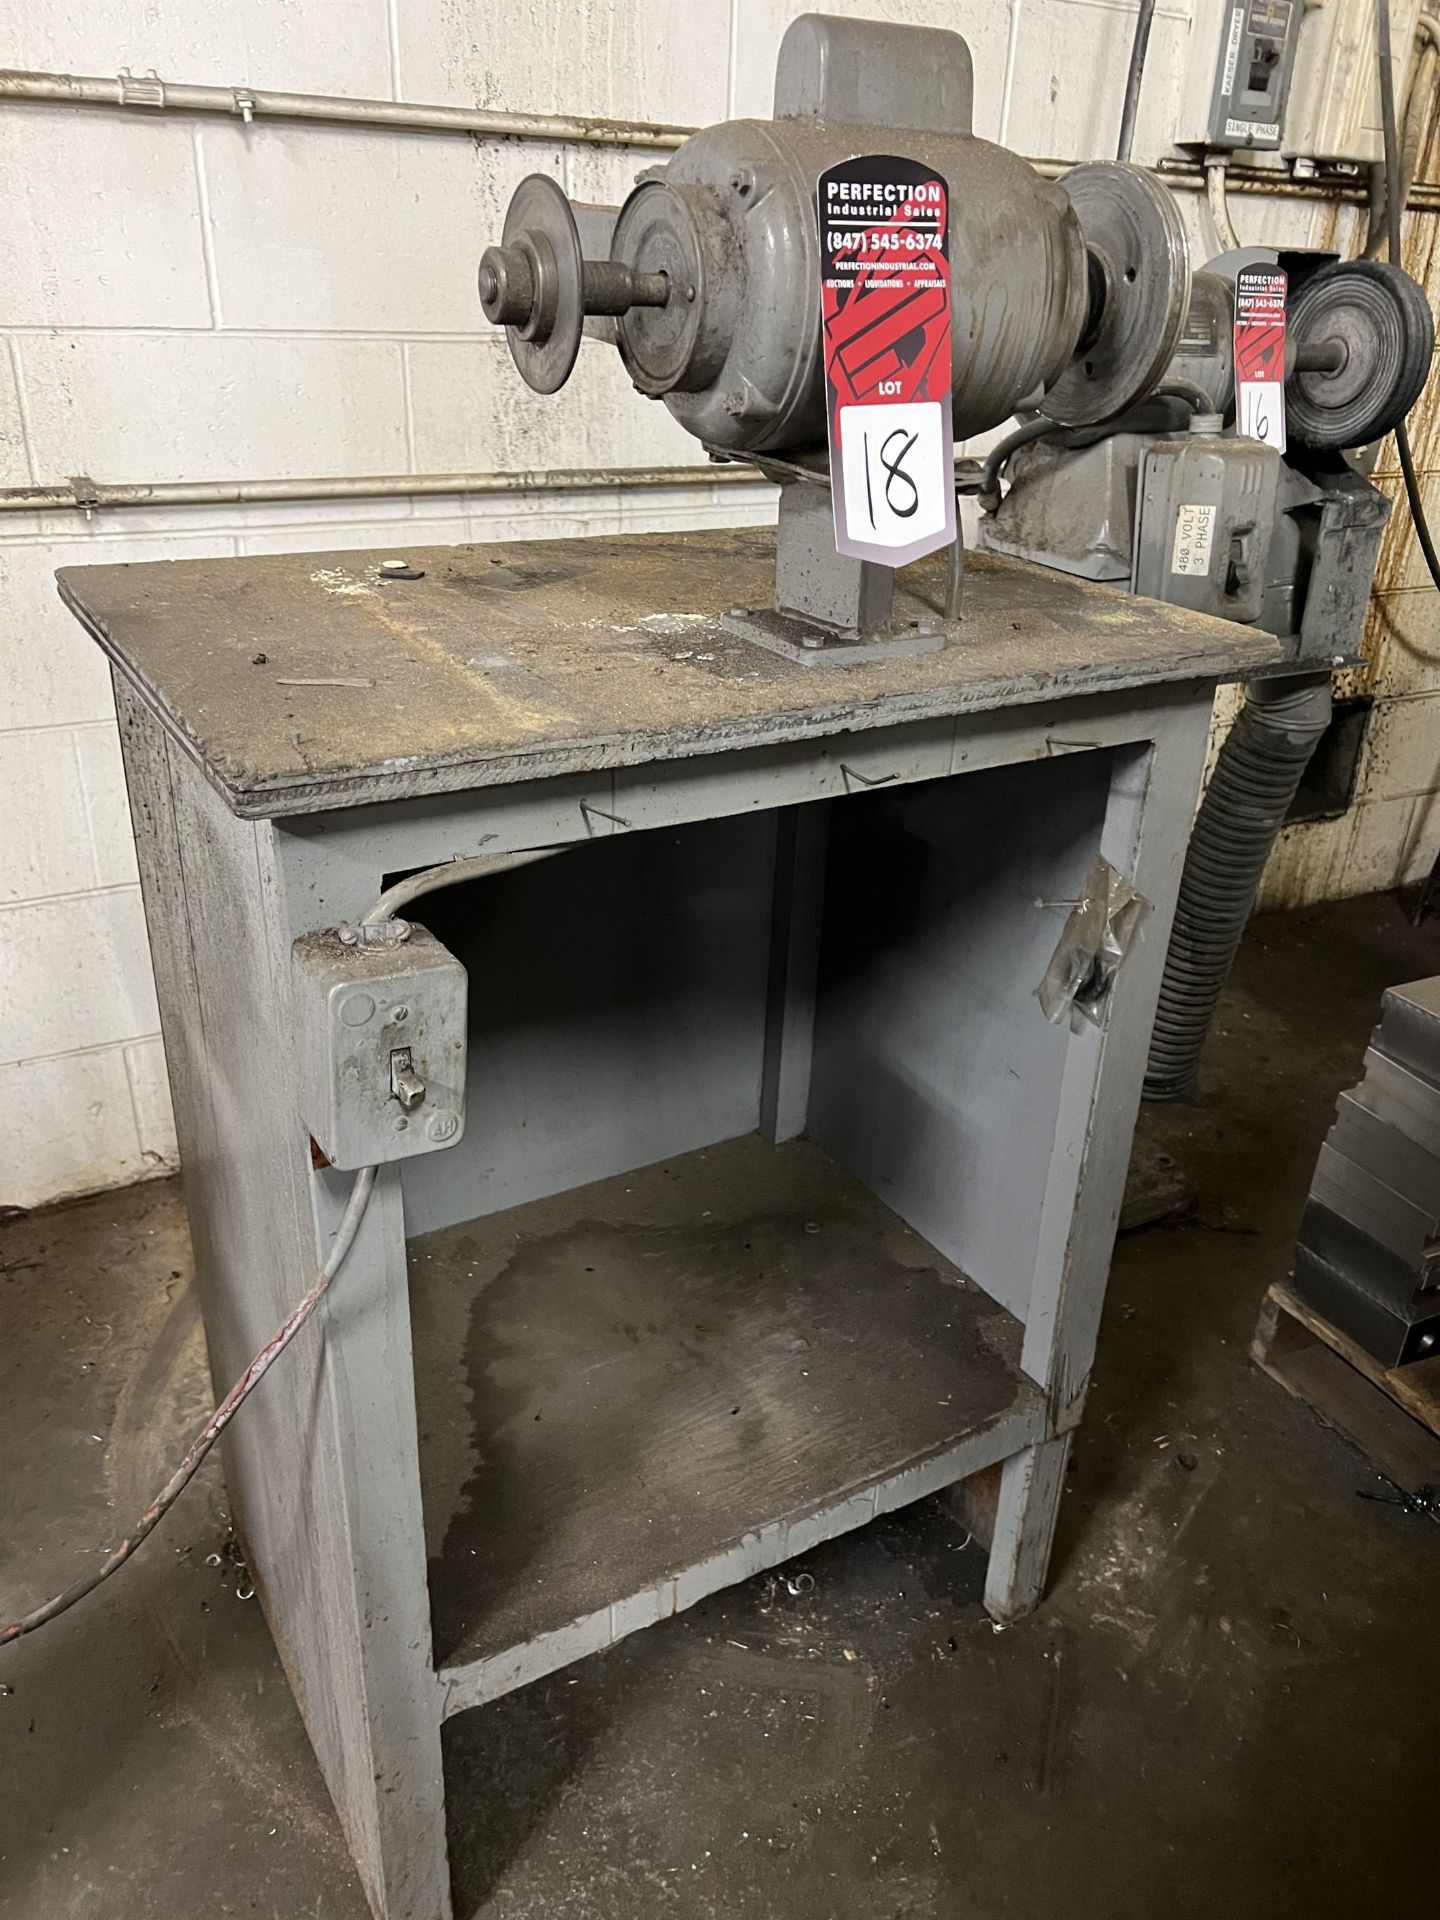 DAYTON 4K781N Bench Grinder, 1/2 HP, 1725 RPM, Mounted on Work Bench (This lot is located at 1935 W.